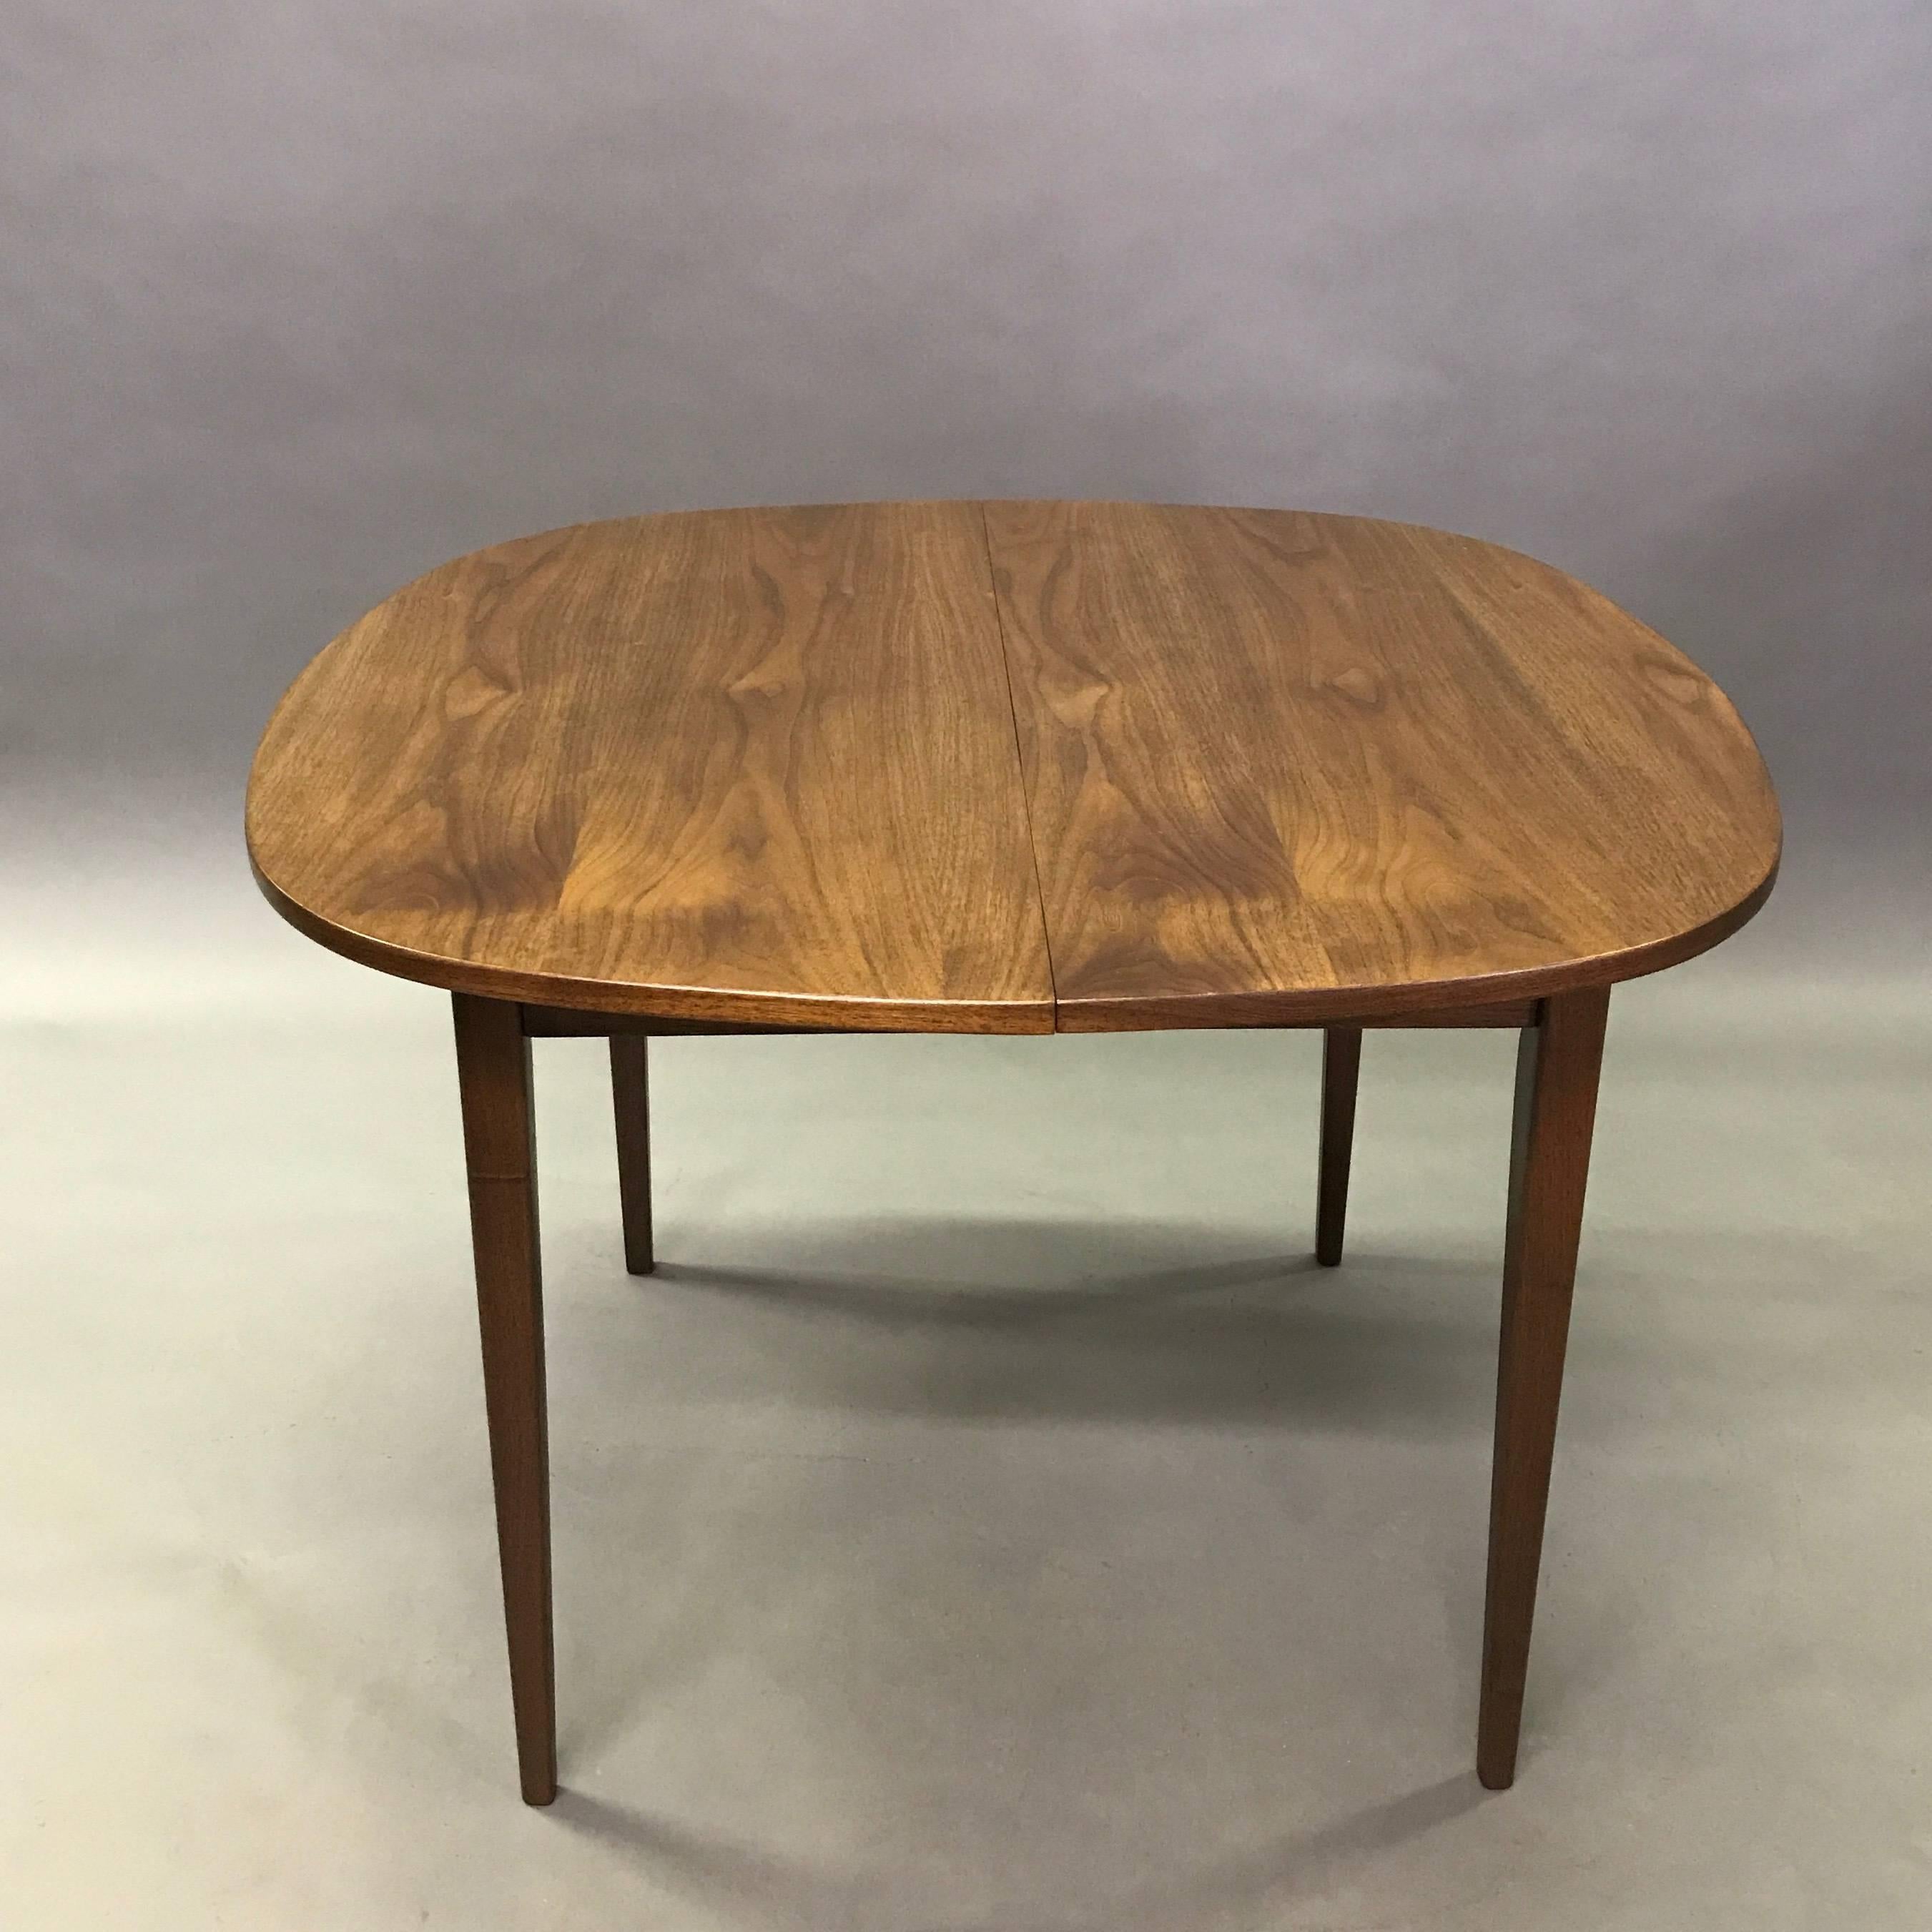 Mid-20th Century Mid-Century Modern Rounded Walnut Dining Table